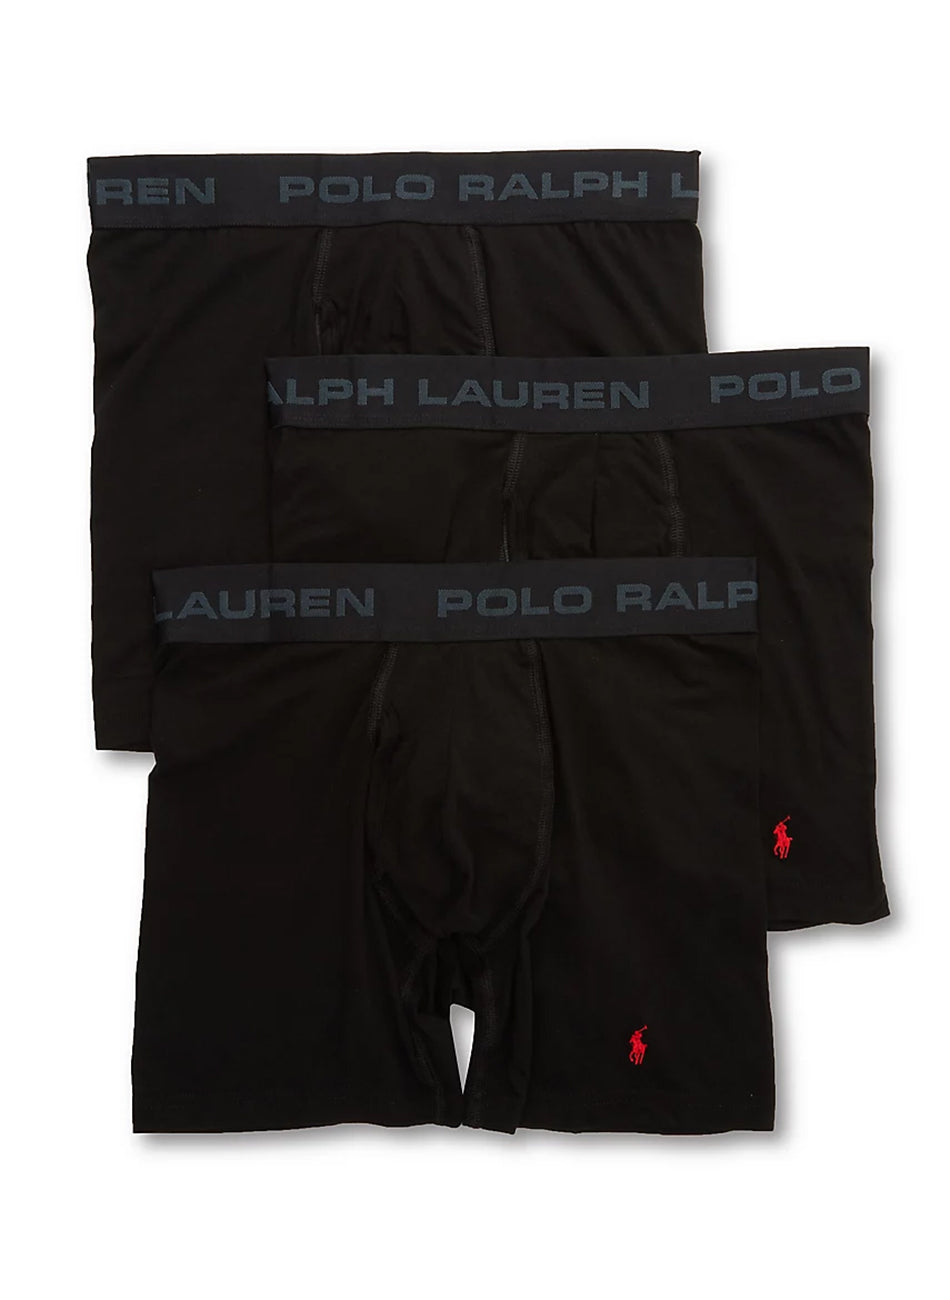 (RCBBP3-RP01) 3 Pack Freedom FX Friction Briefs - Polo Black/Red PP